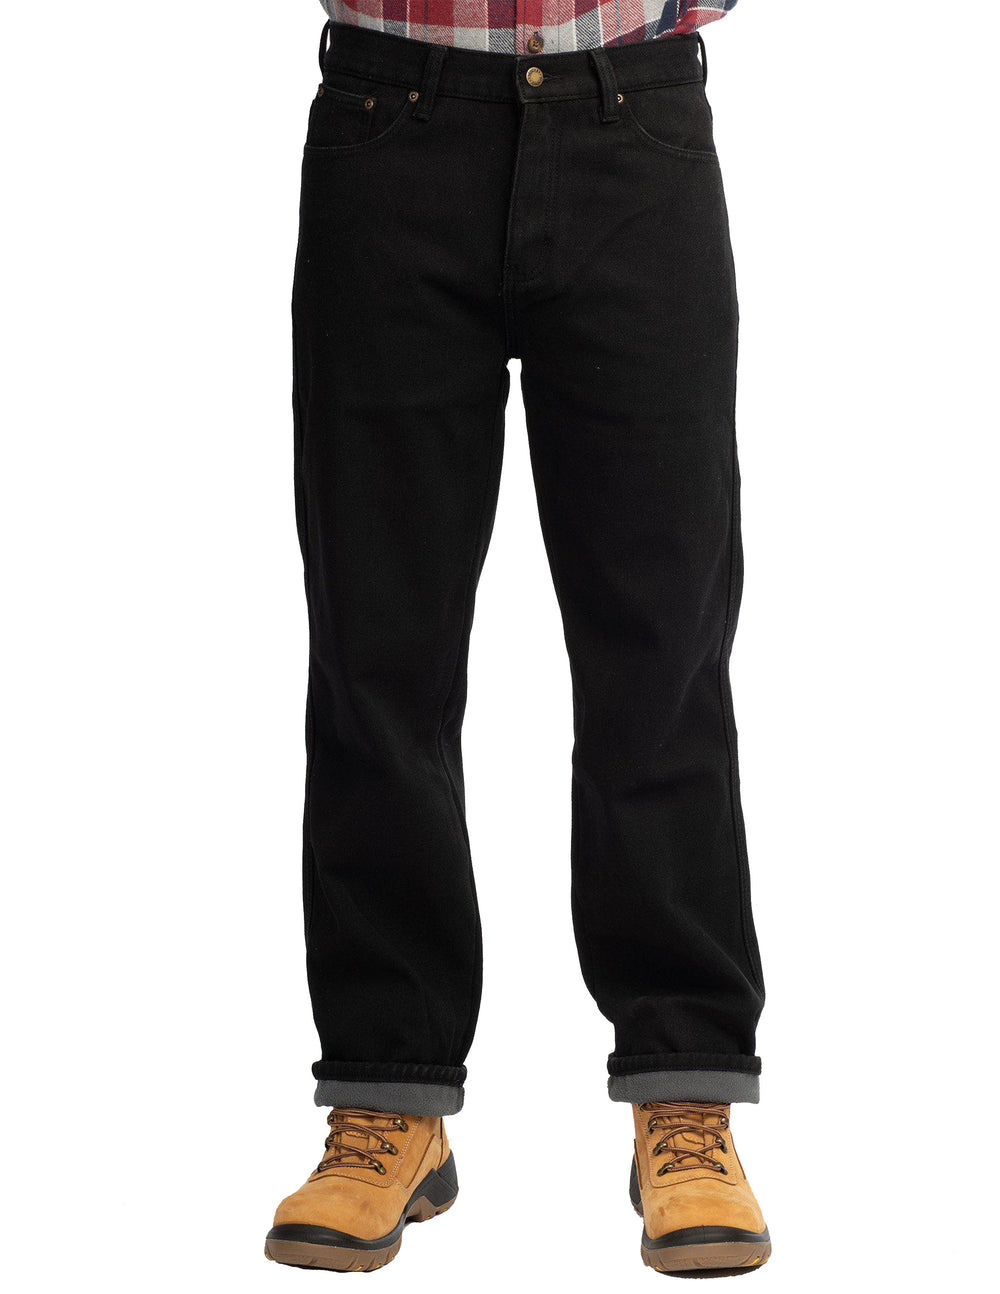 Shop by Category - Denim Lined - Jeans Lined - FiveBrother WorkWear